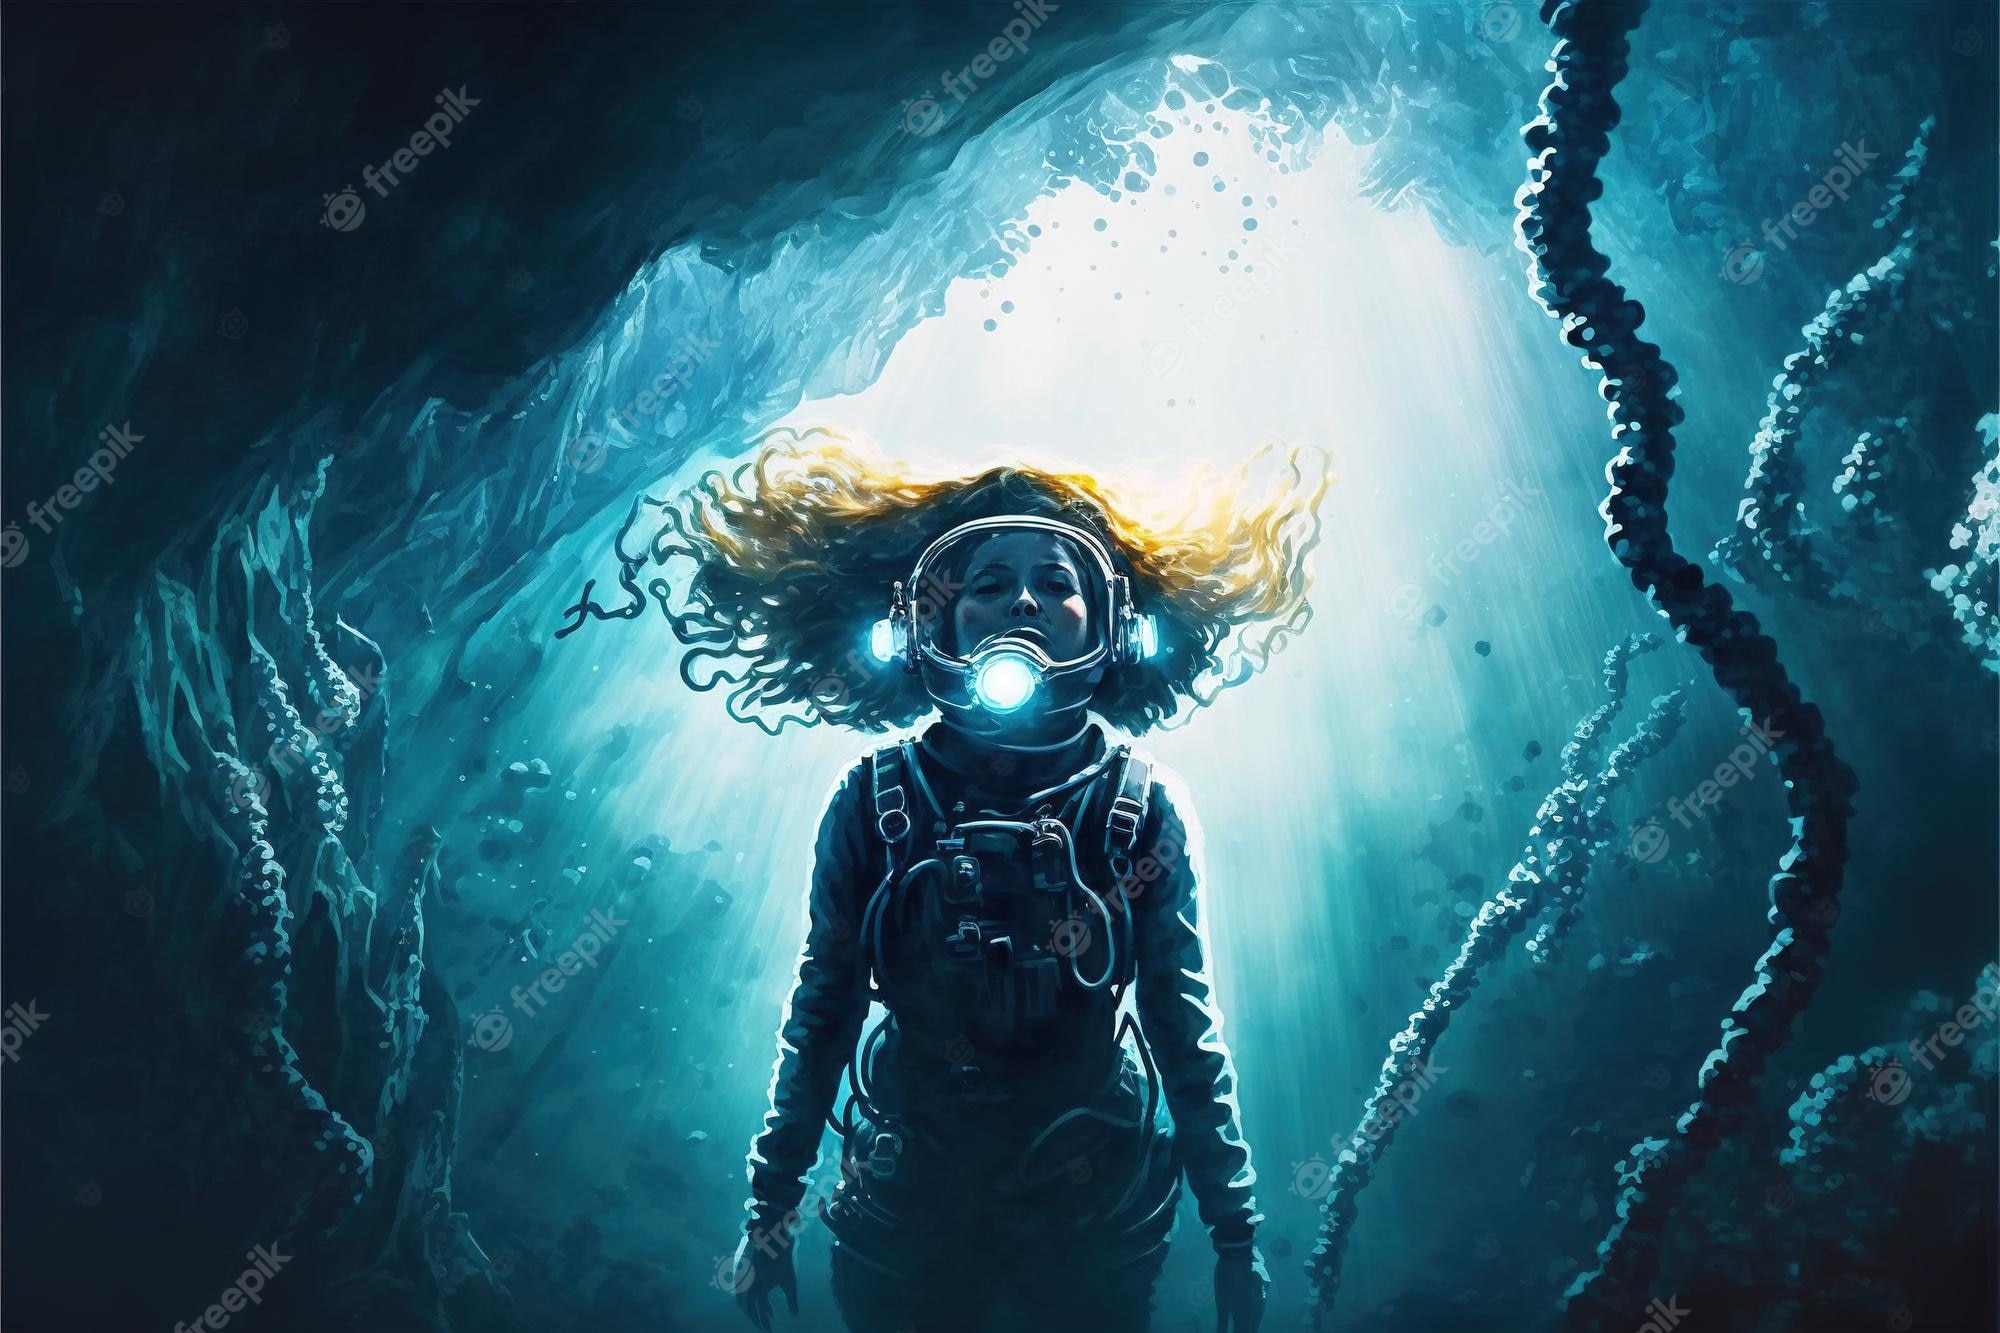 Premium Photo. Woman dive underwater to see a mysterious light under the sea digital art style illustration painting fantasy concept of a diver in the water